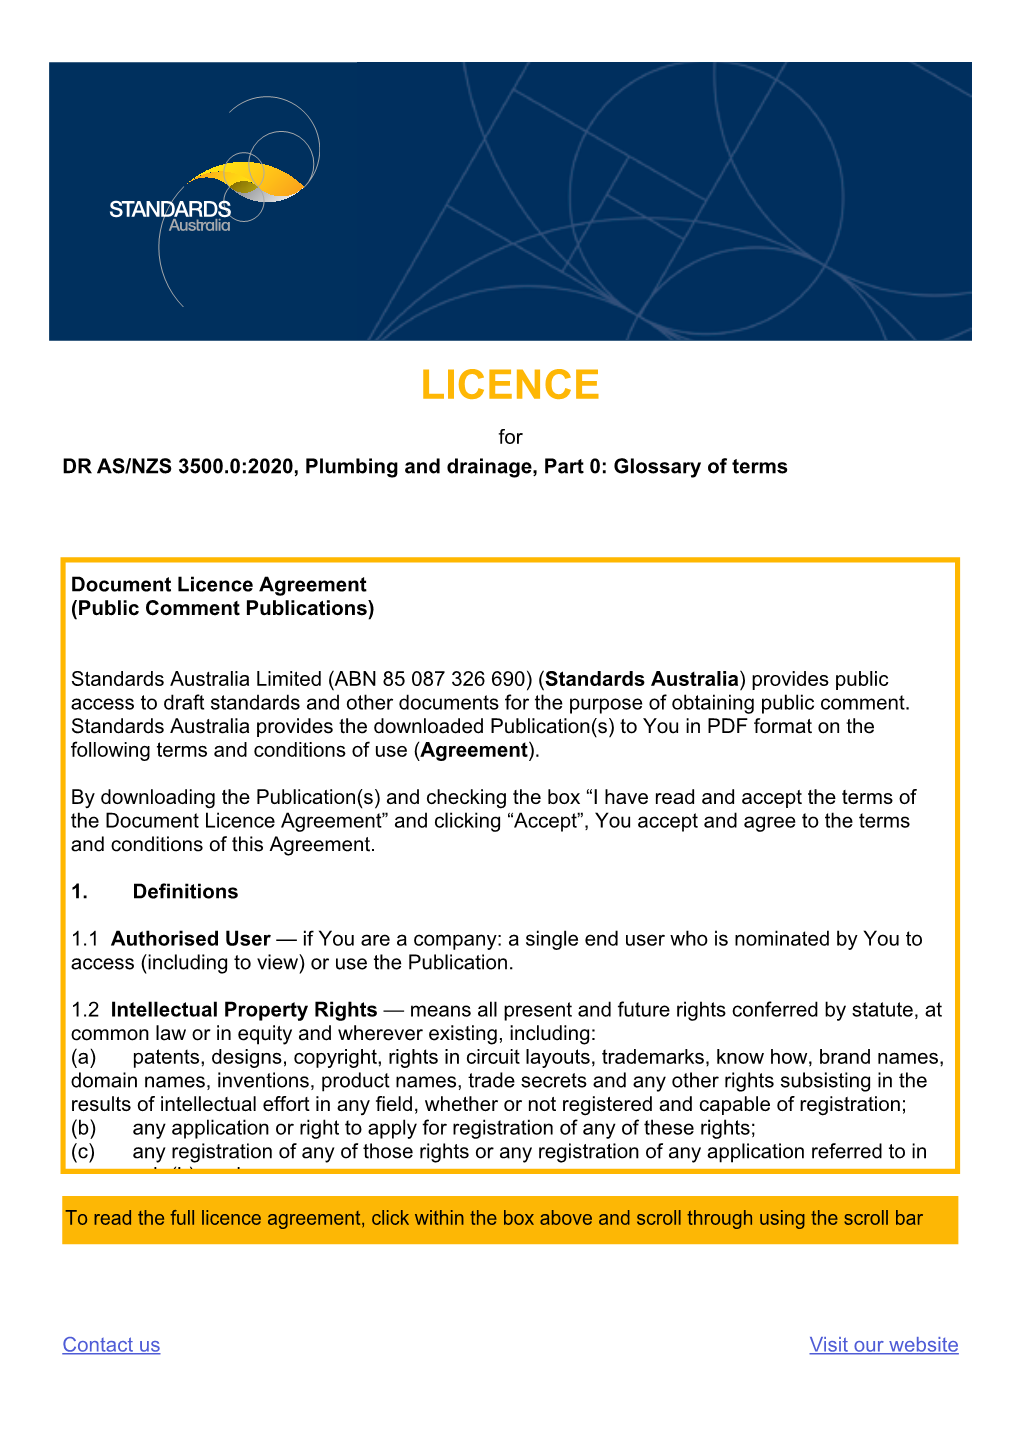 LICENCE for DR AS/NZS 3500.0:2020, Plumbing and Drainage, Part 0: Glossary of Terms